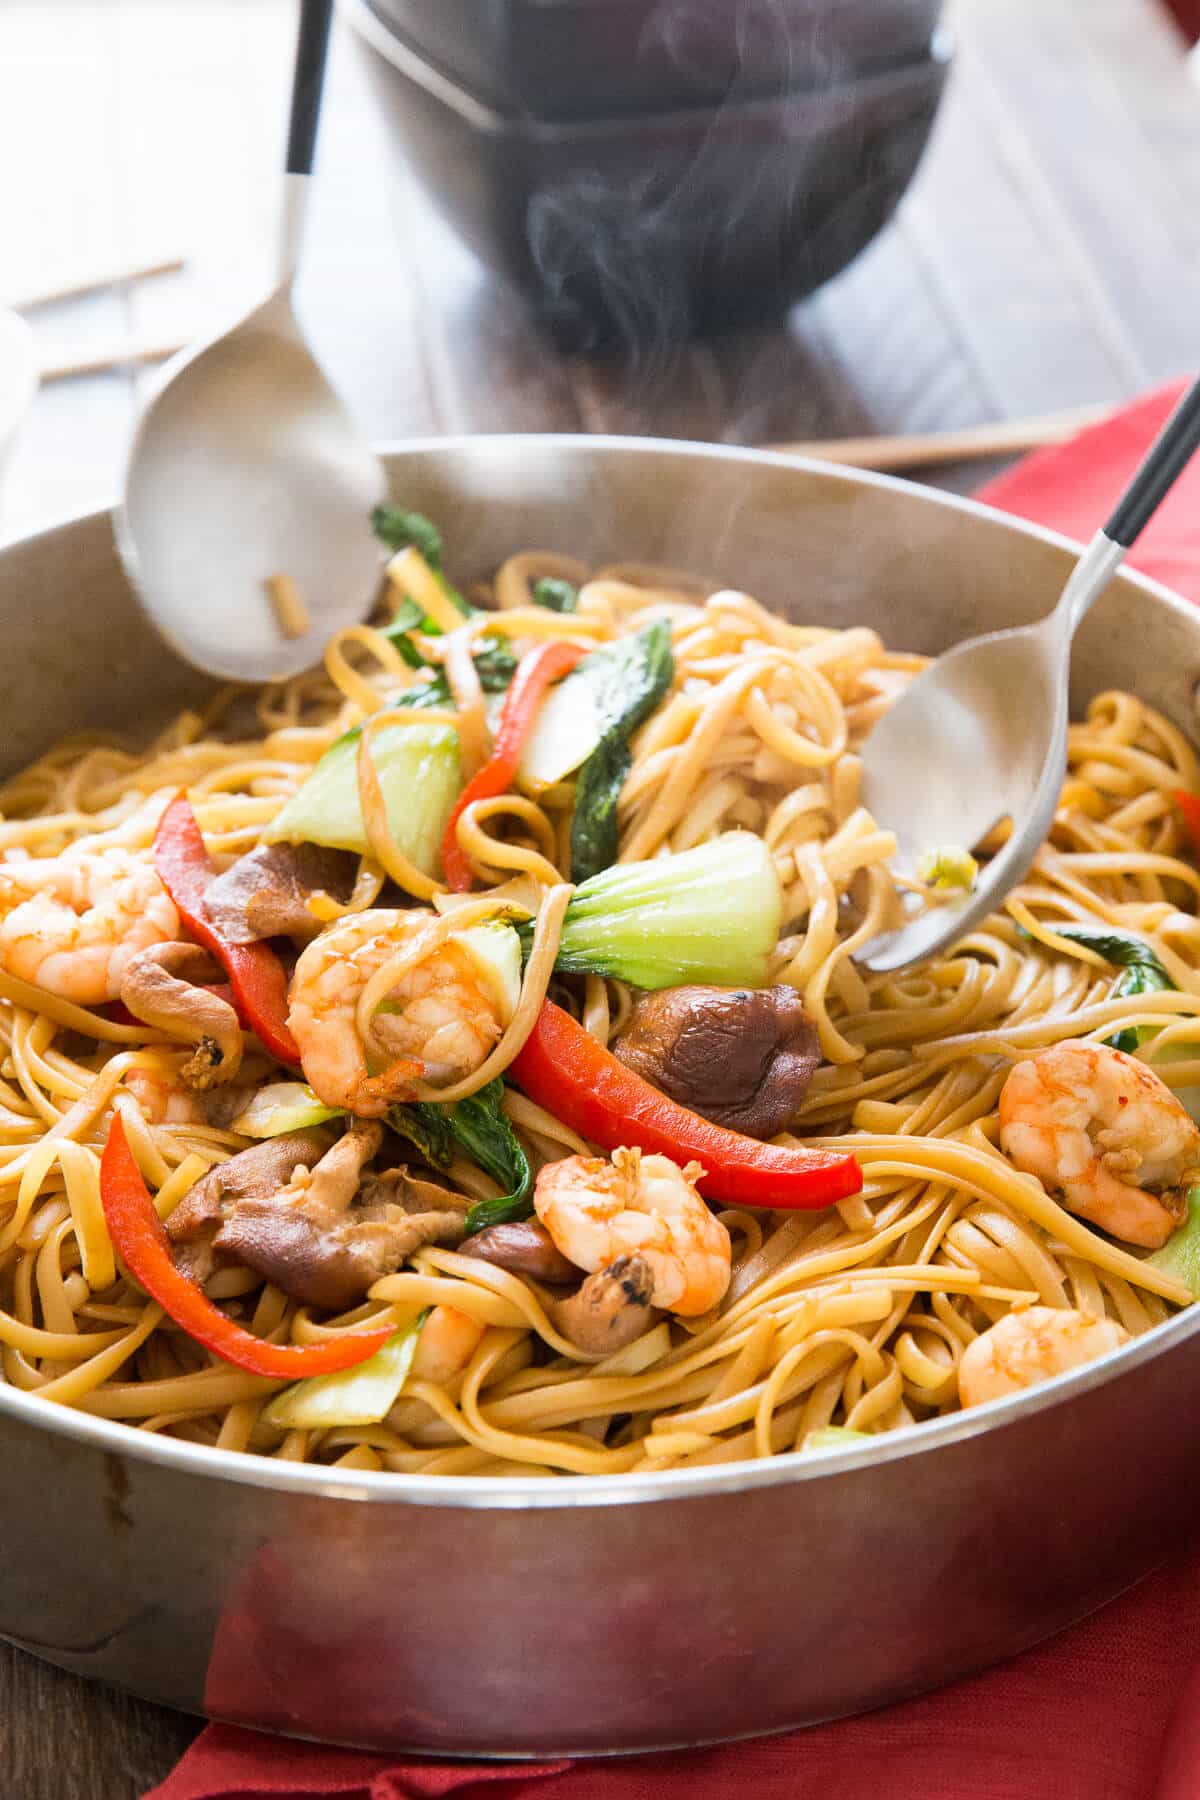 Shrimp Lo Mein is a dish that combines ease and flavor!   Saucy noodles, vegetables, and shrimp make take out a thing of the past!